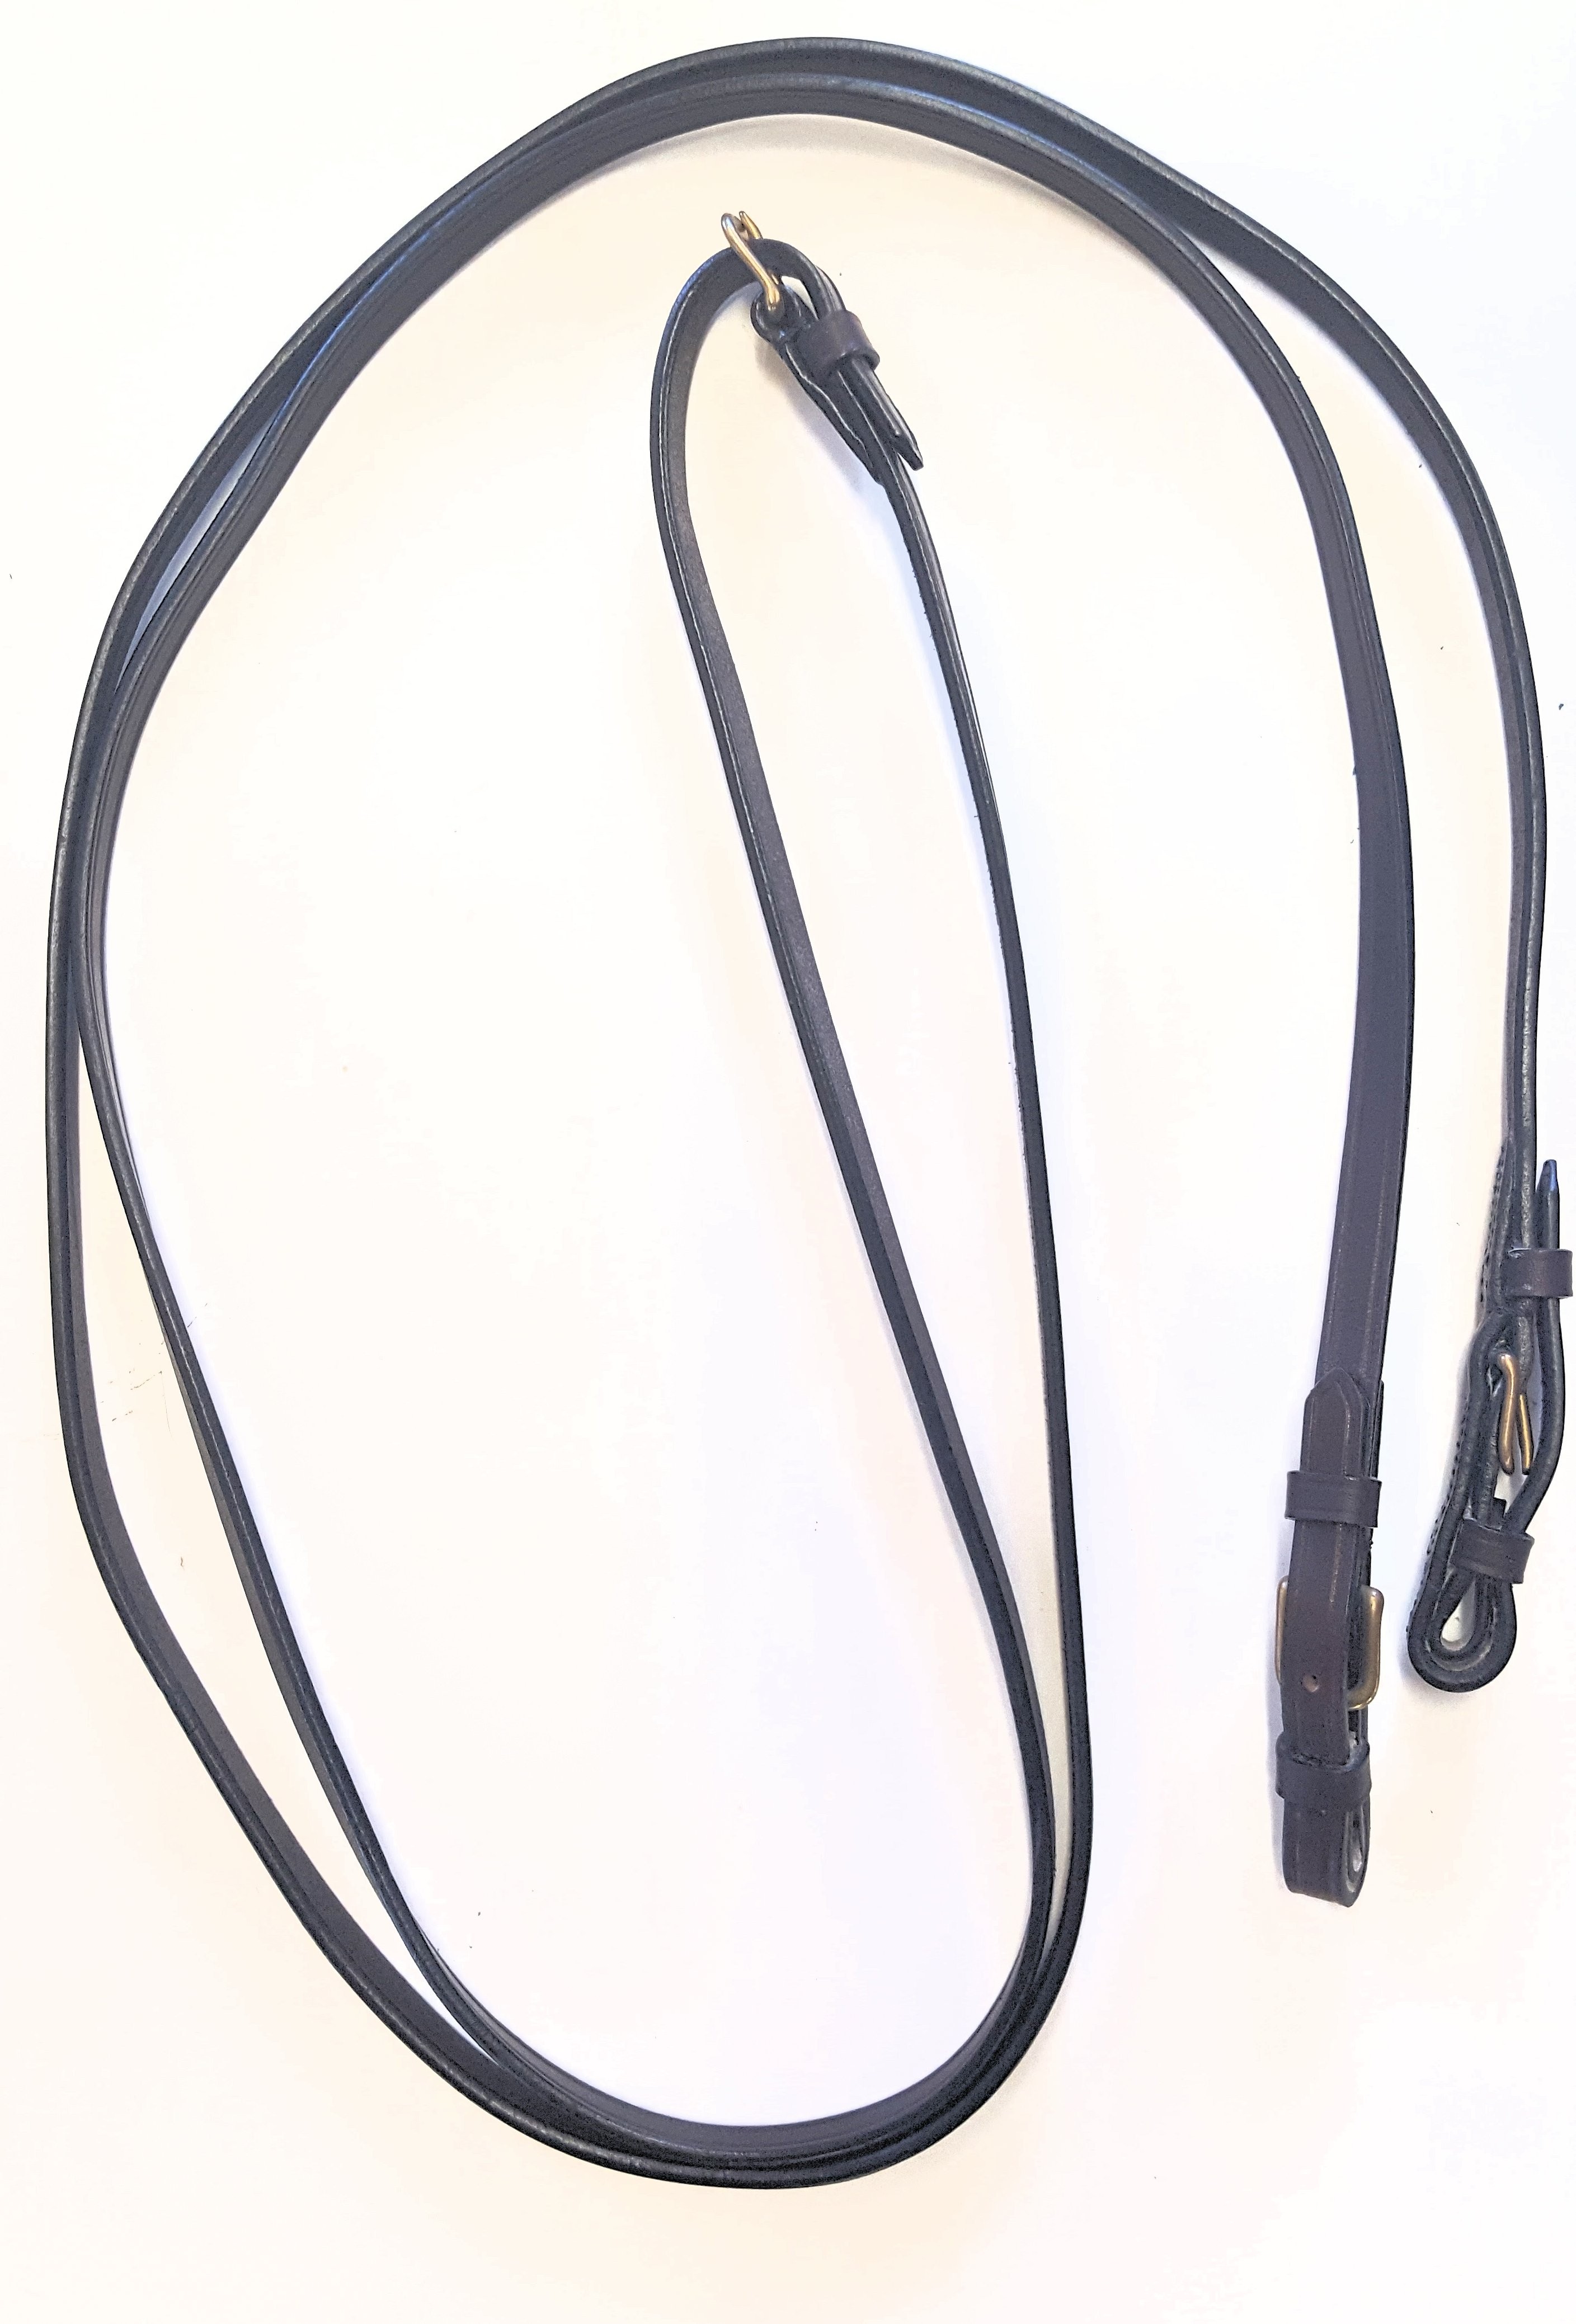 LEATHER ENGLISH REINS WITH BUCKLES  1/2" Wide